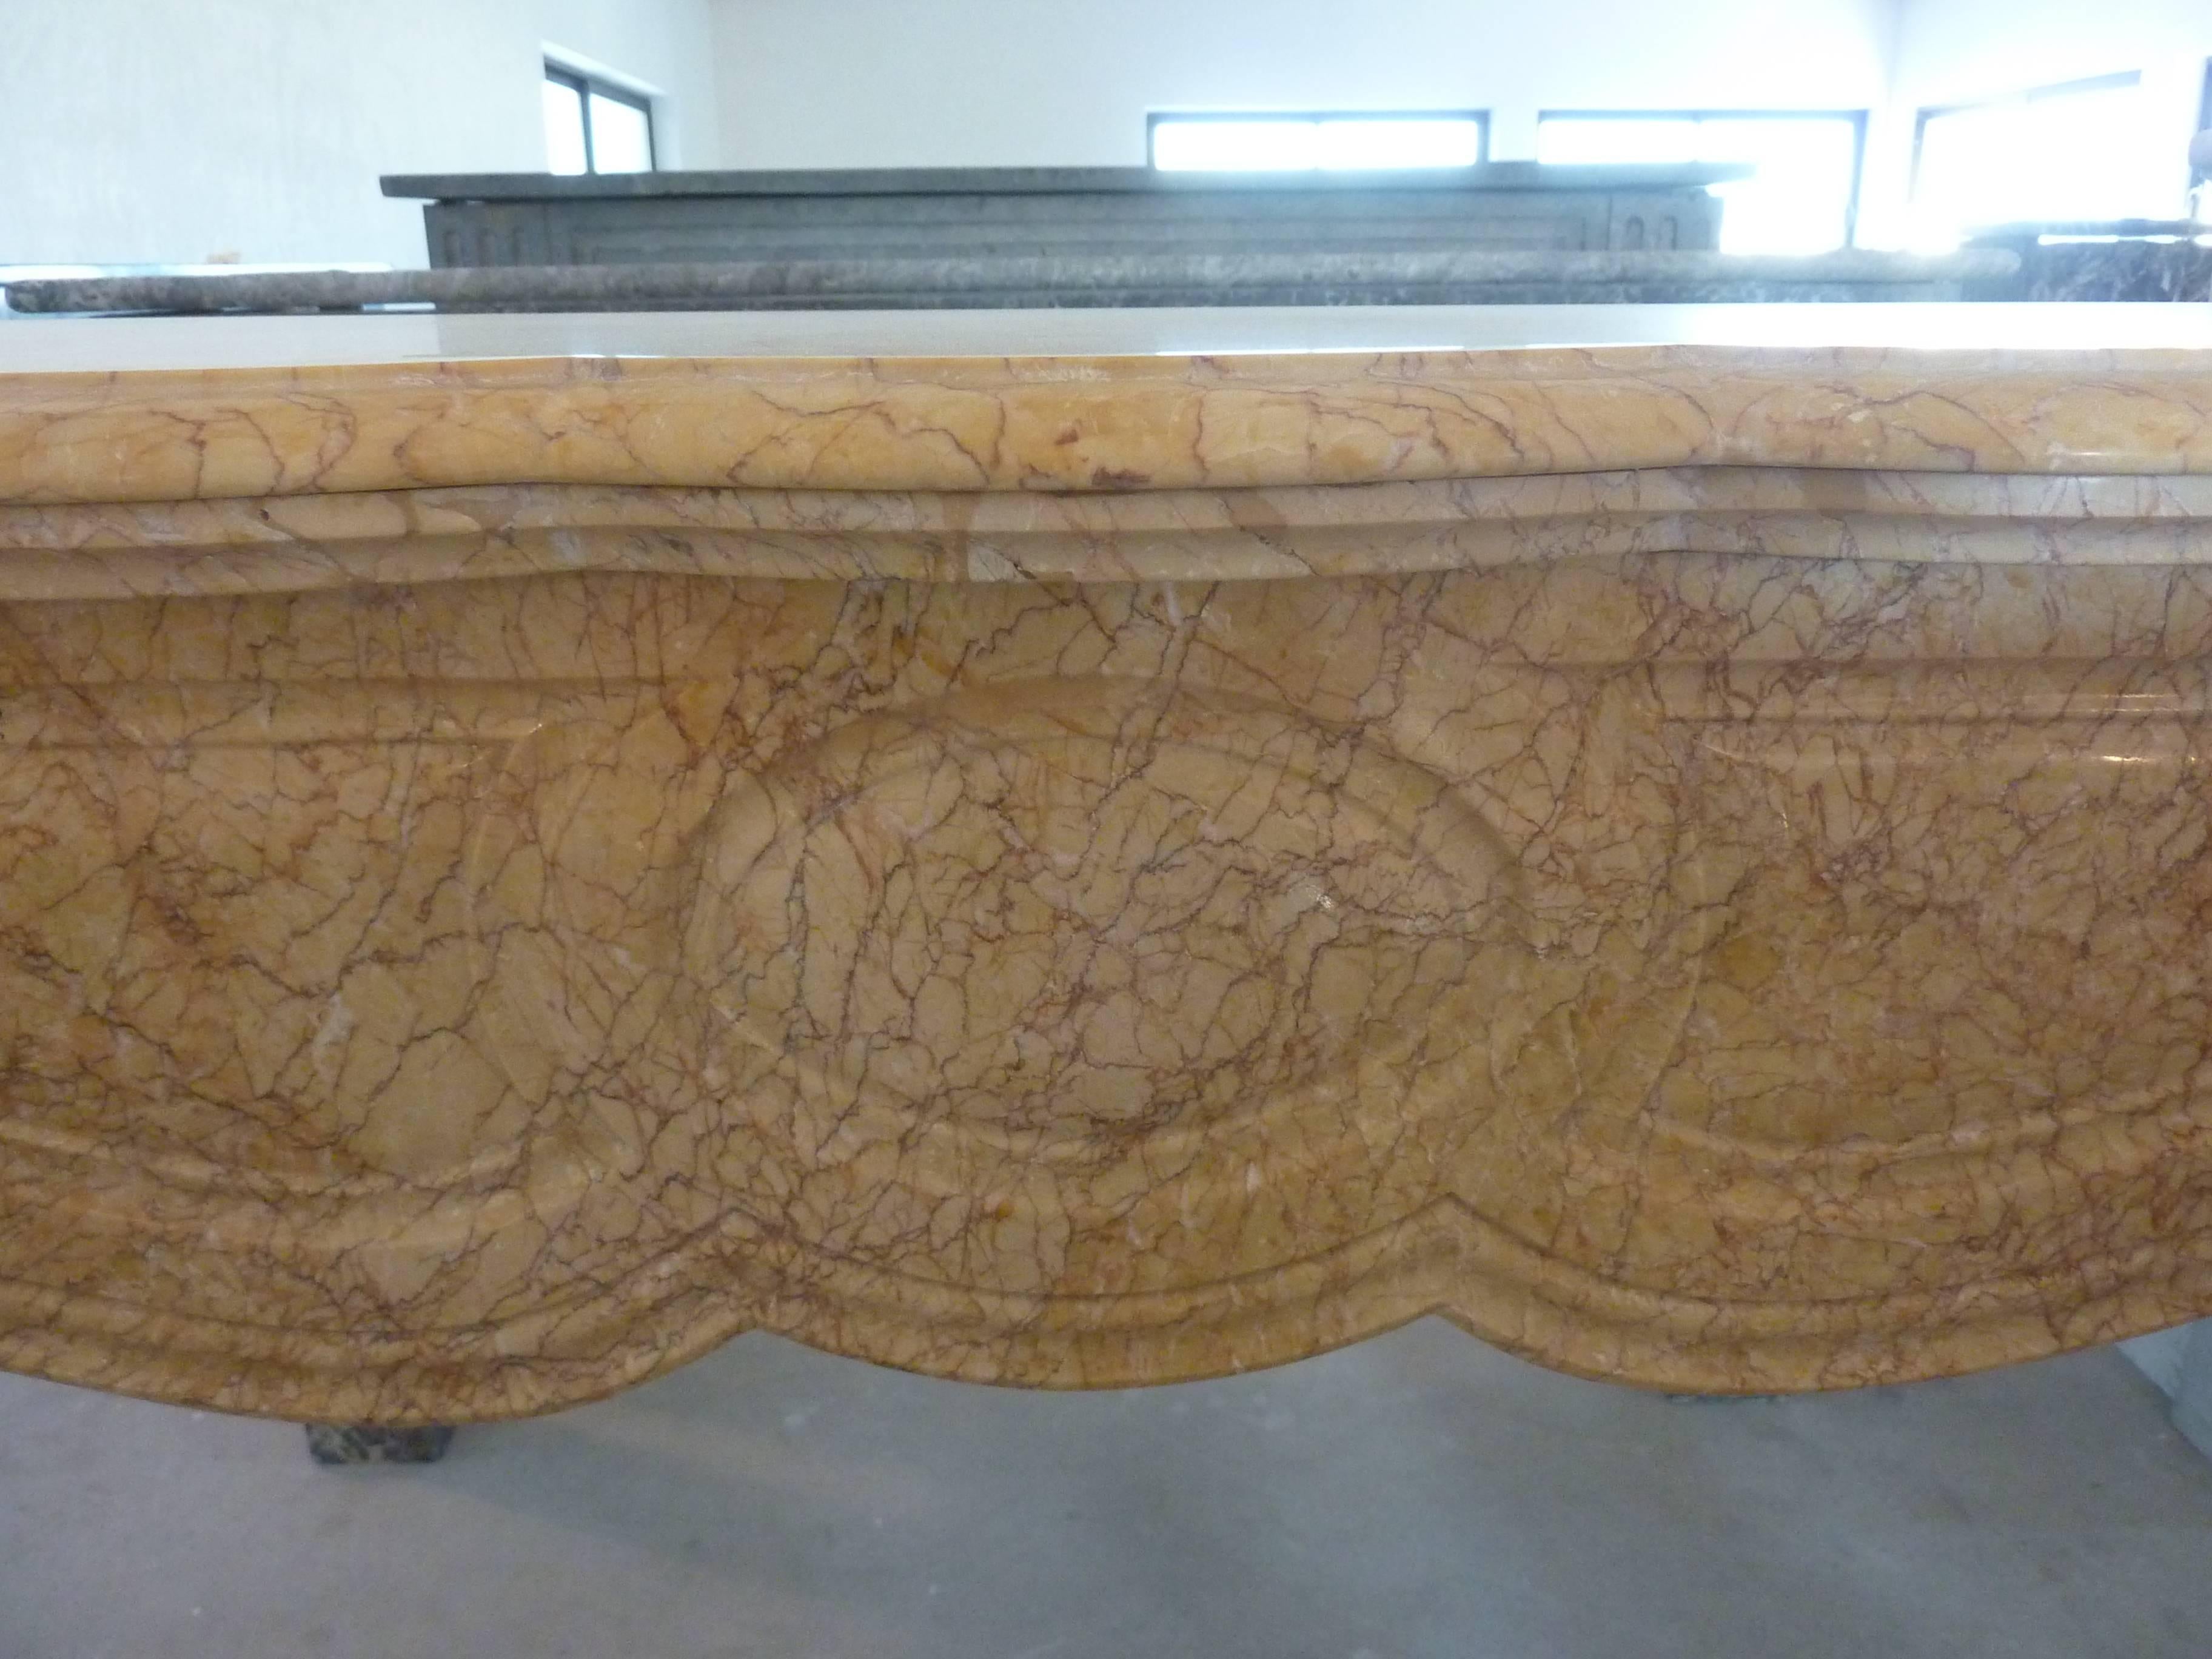 This wonderful antique fireplace is made of Trets marble. This marble was extracted from quarries that no longer exist. This Breccia marble has a light ocher color with thin red and brown veins.

This 19th century Pompadour fireplace is strongly